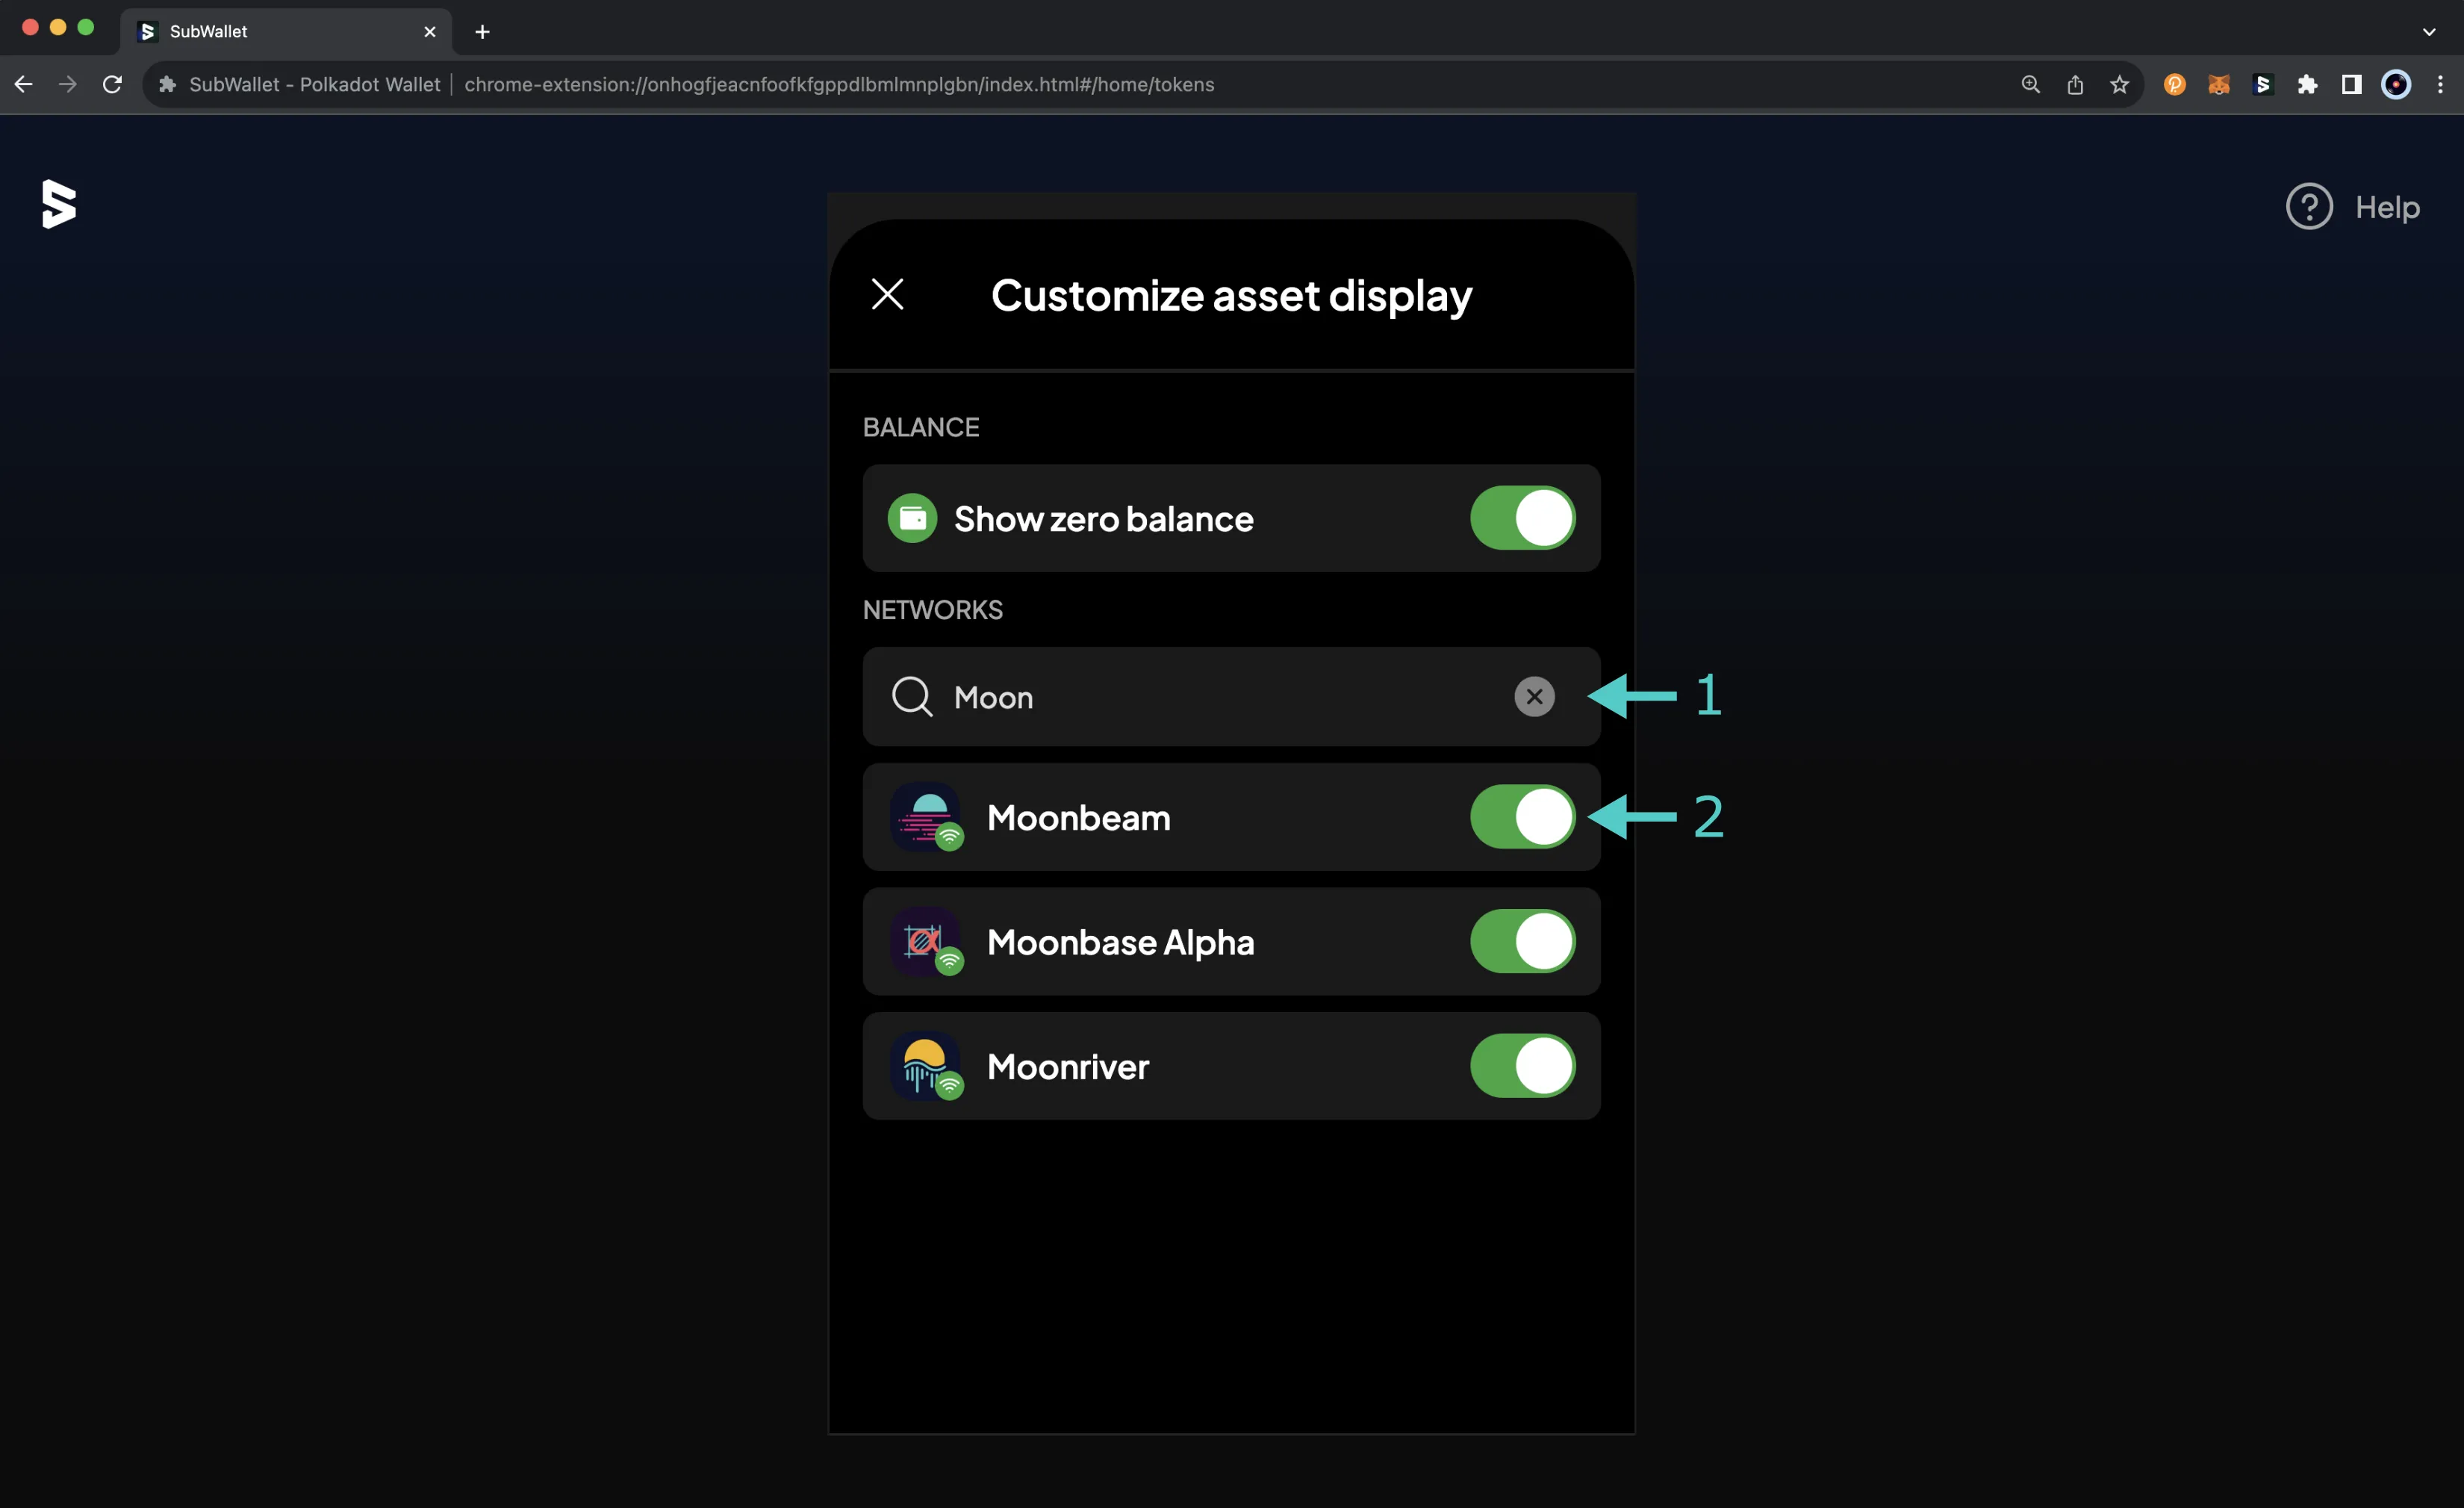 The customize asset display screen on the SubWallet browser extension.